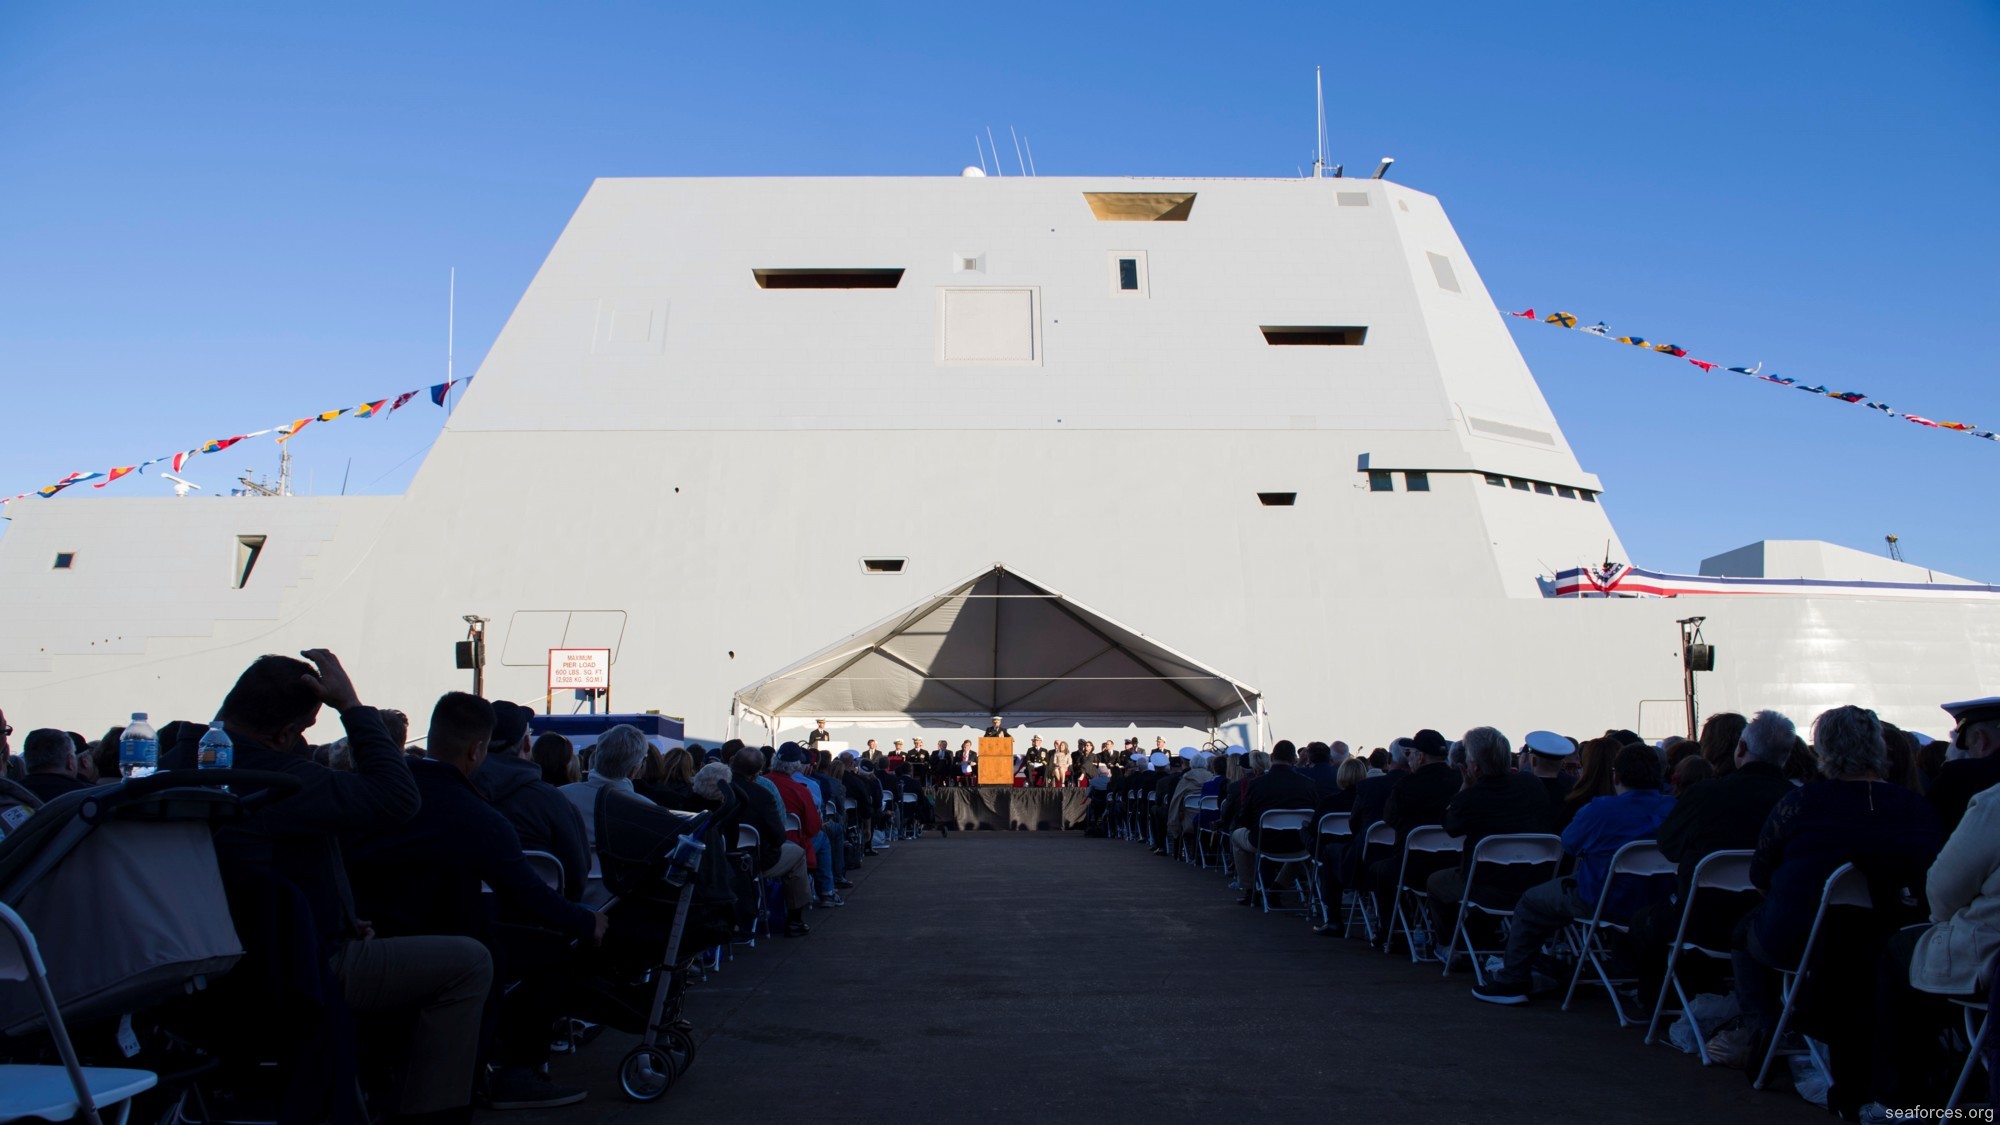 ddg-1000 uss zumwalt guided missile destroyer 32 commissioning ceremony baltimore maryland